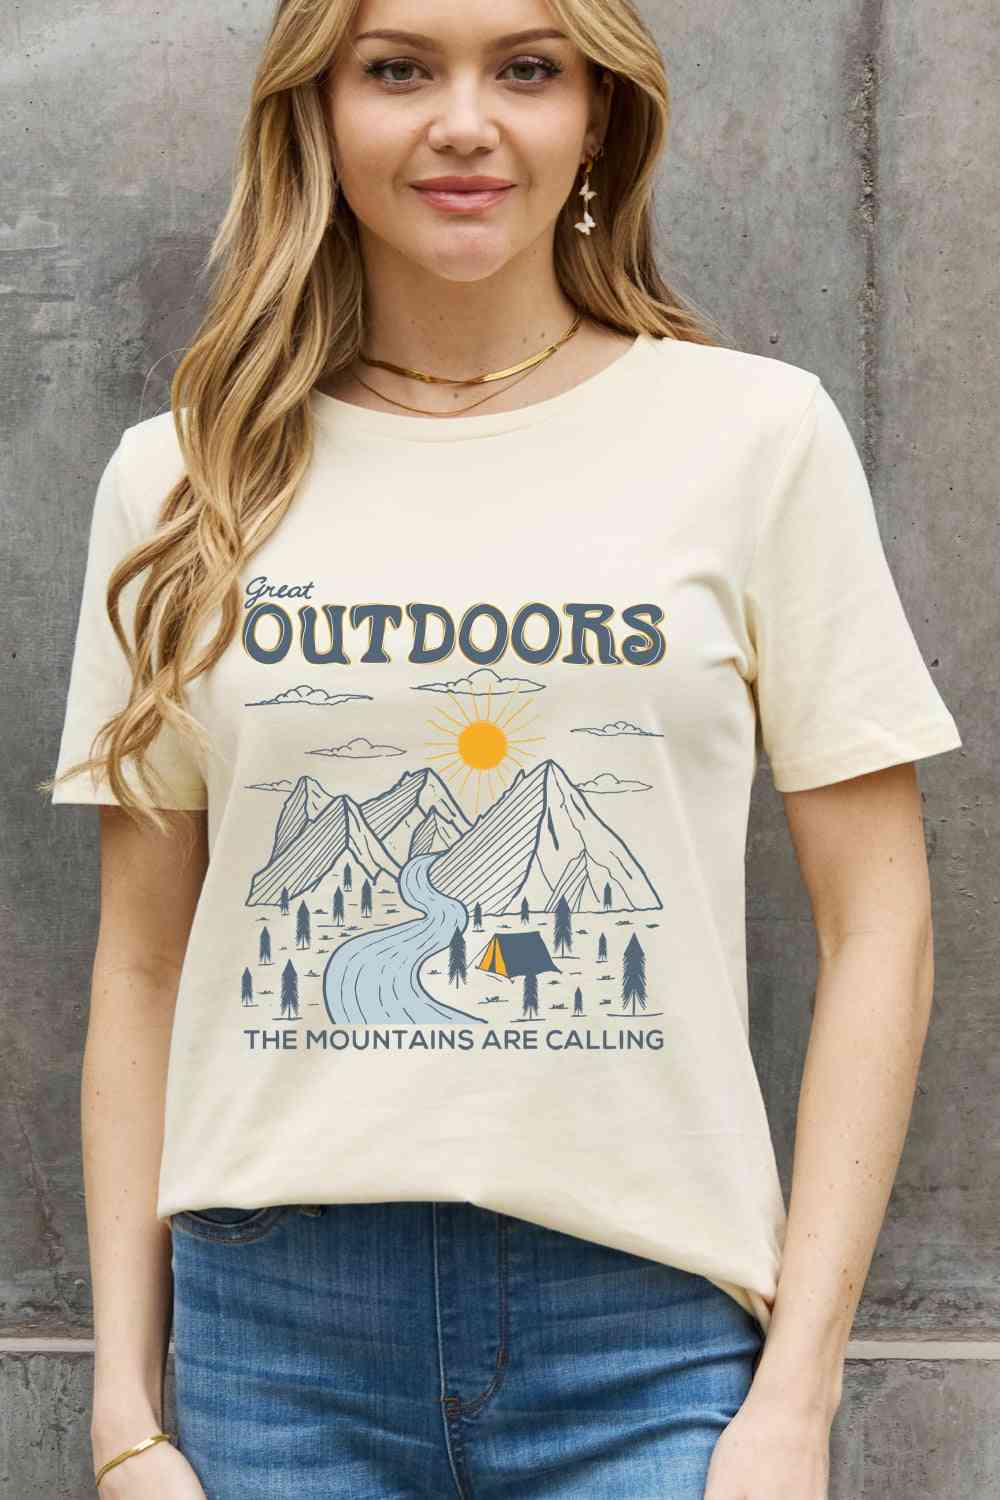 Simply Love Full Size GREAT OUTDOORS Graphic Cotton Tee - Shop Tophatter Deals, Electronics, Fashion, Jewelry, Health, Beauty, Home Decor, Free Shipping